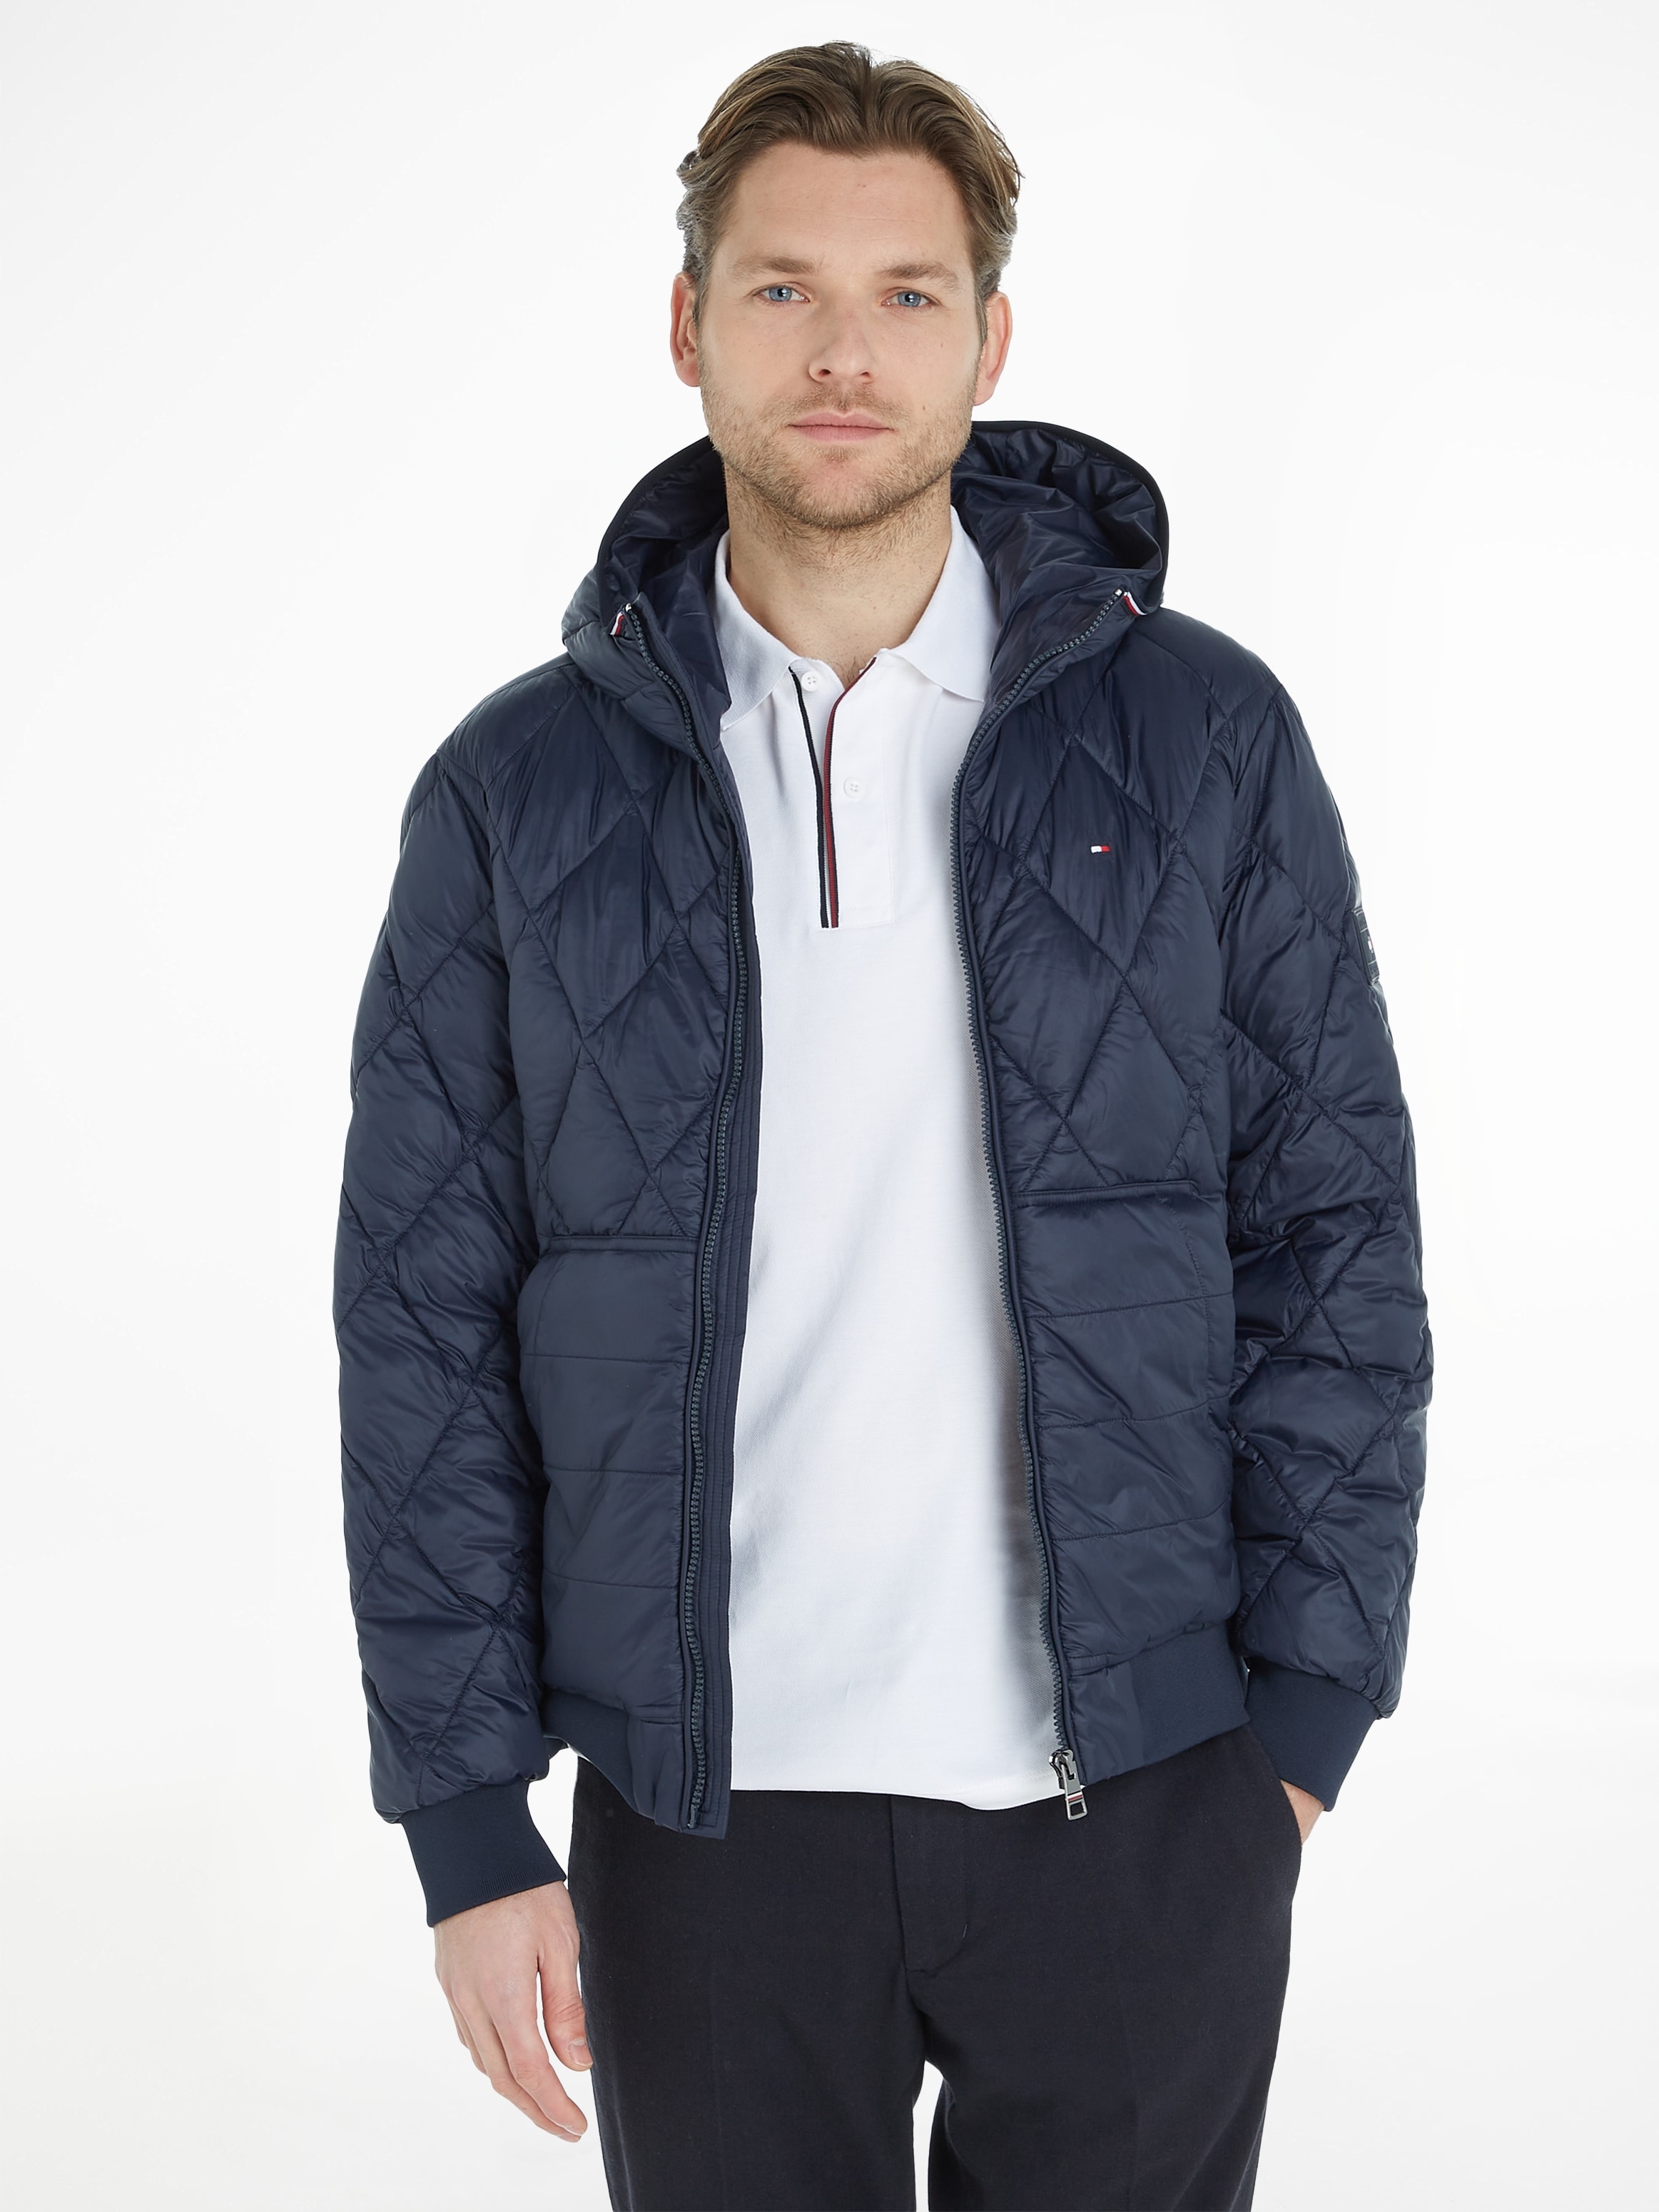 Tommy Hilfiger Steppjacke bei mit RECYCLED«, QUILT ♕ »MIX Kapuze